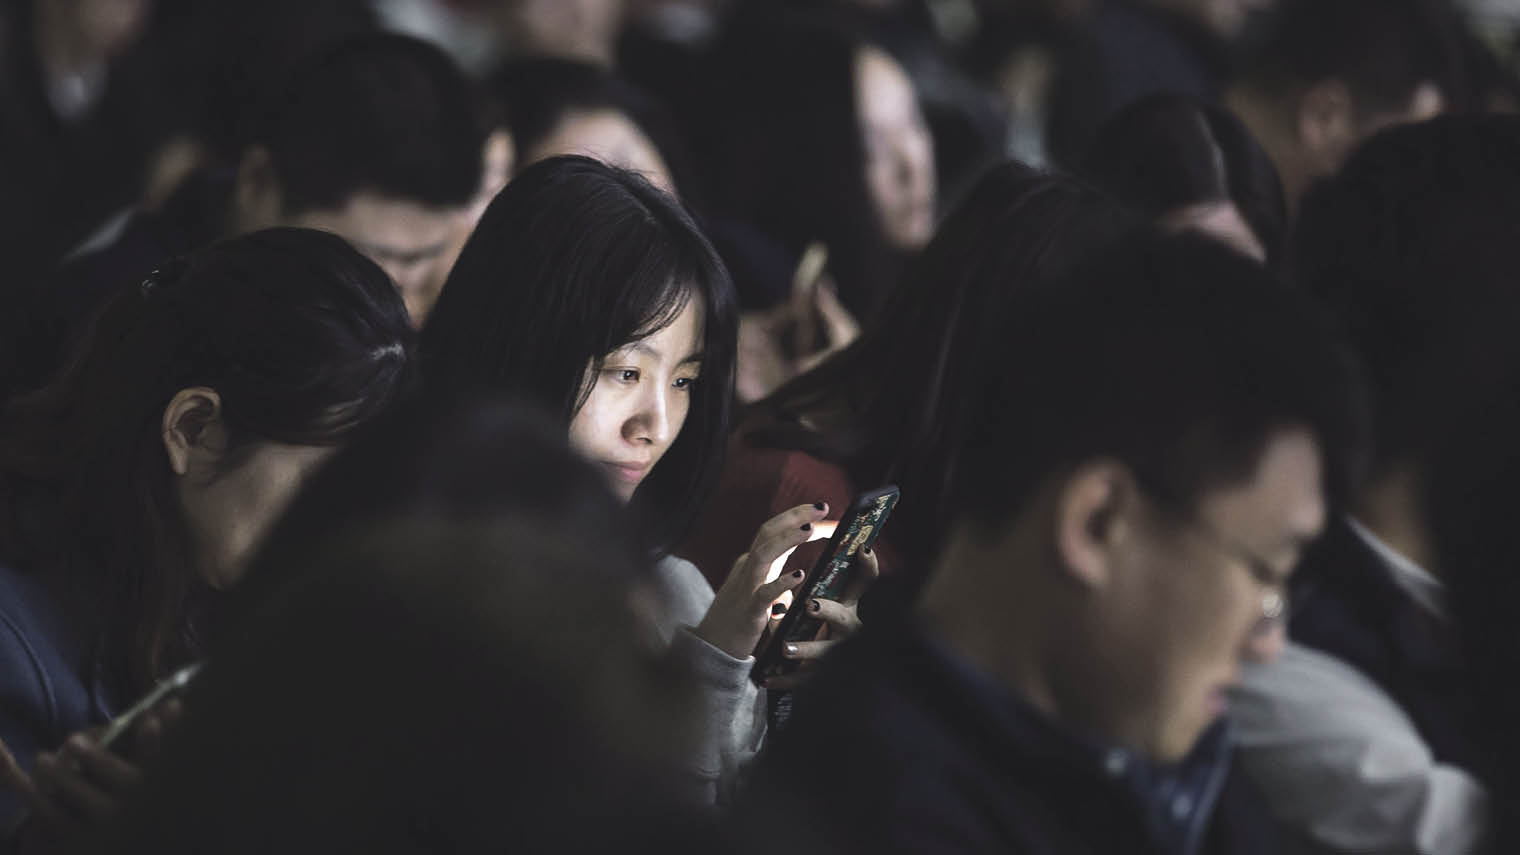 China: WeChat offers huge opportunity in social retail - Raconteur